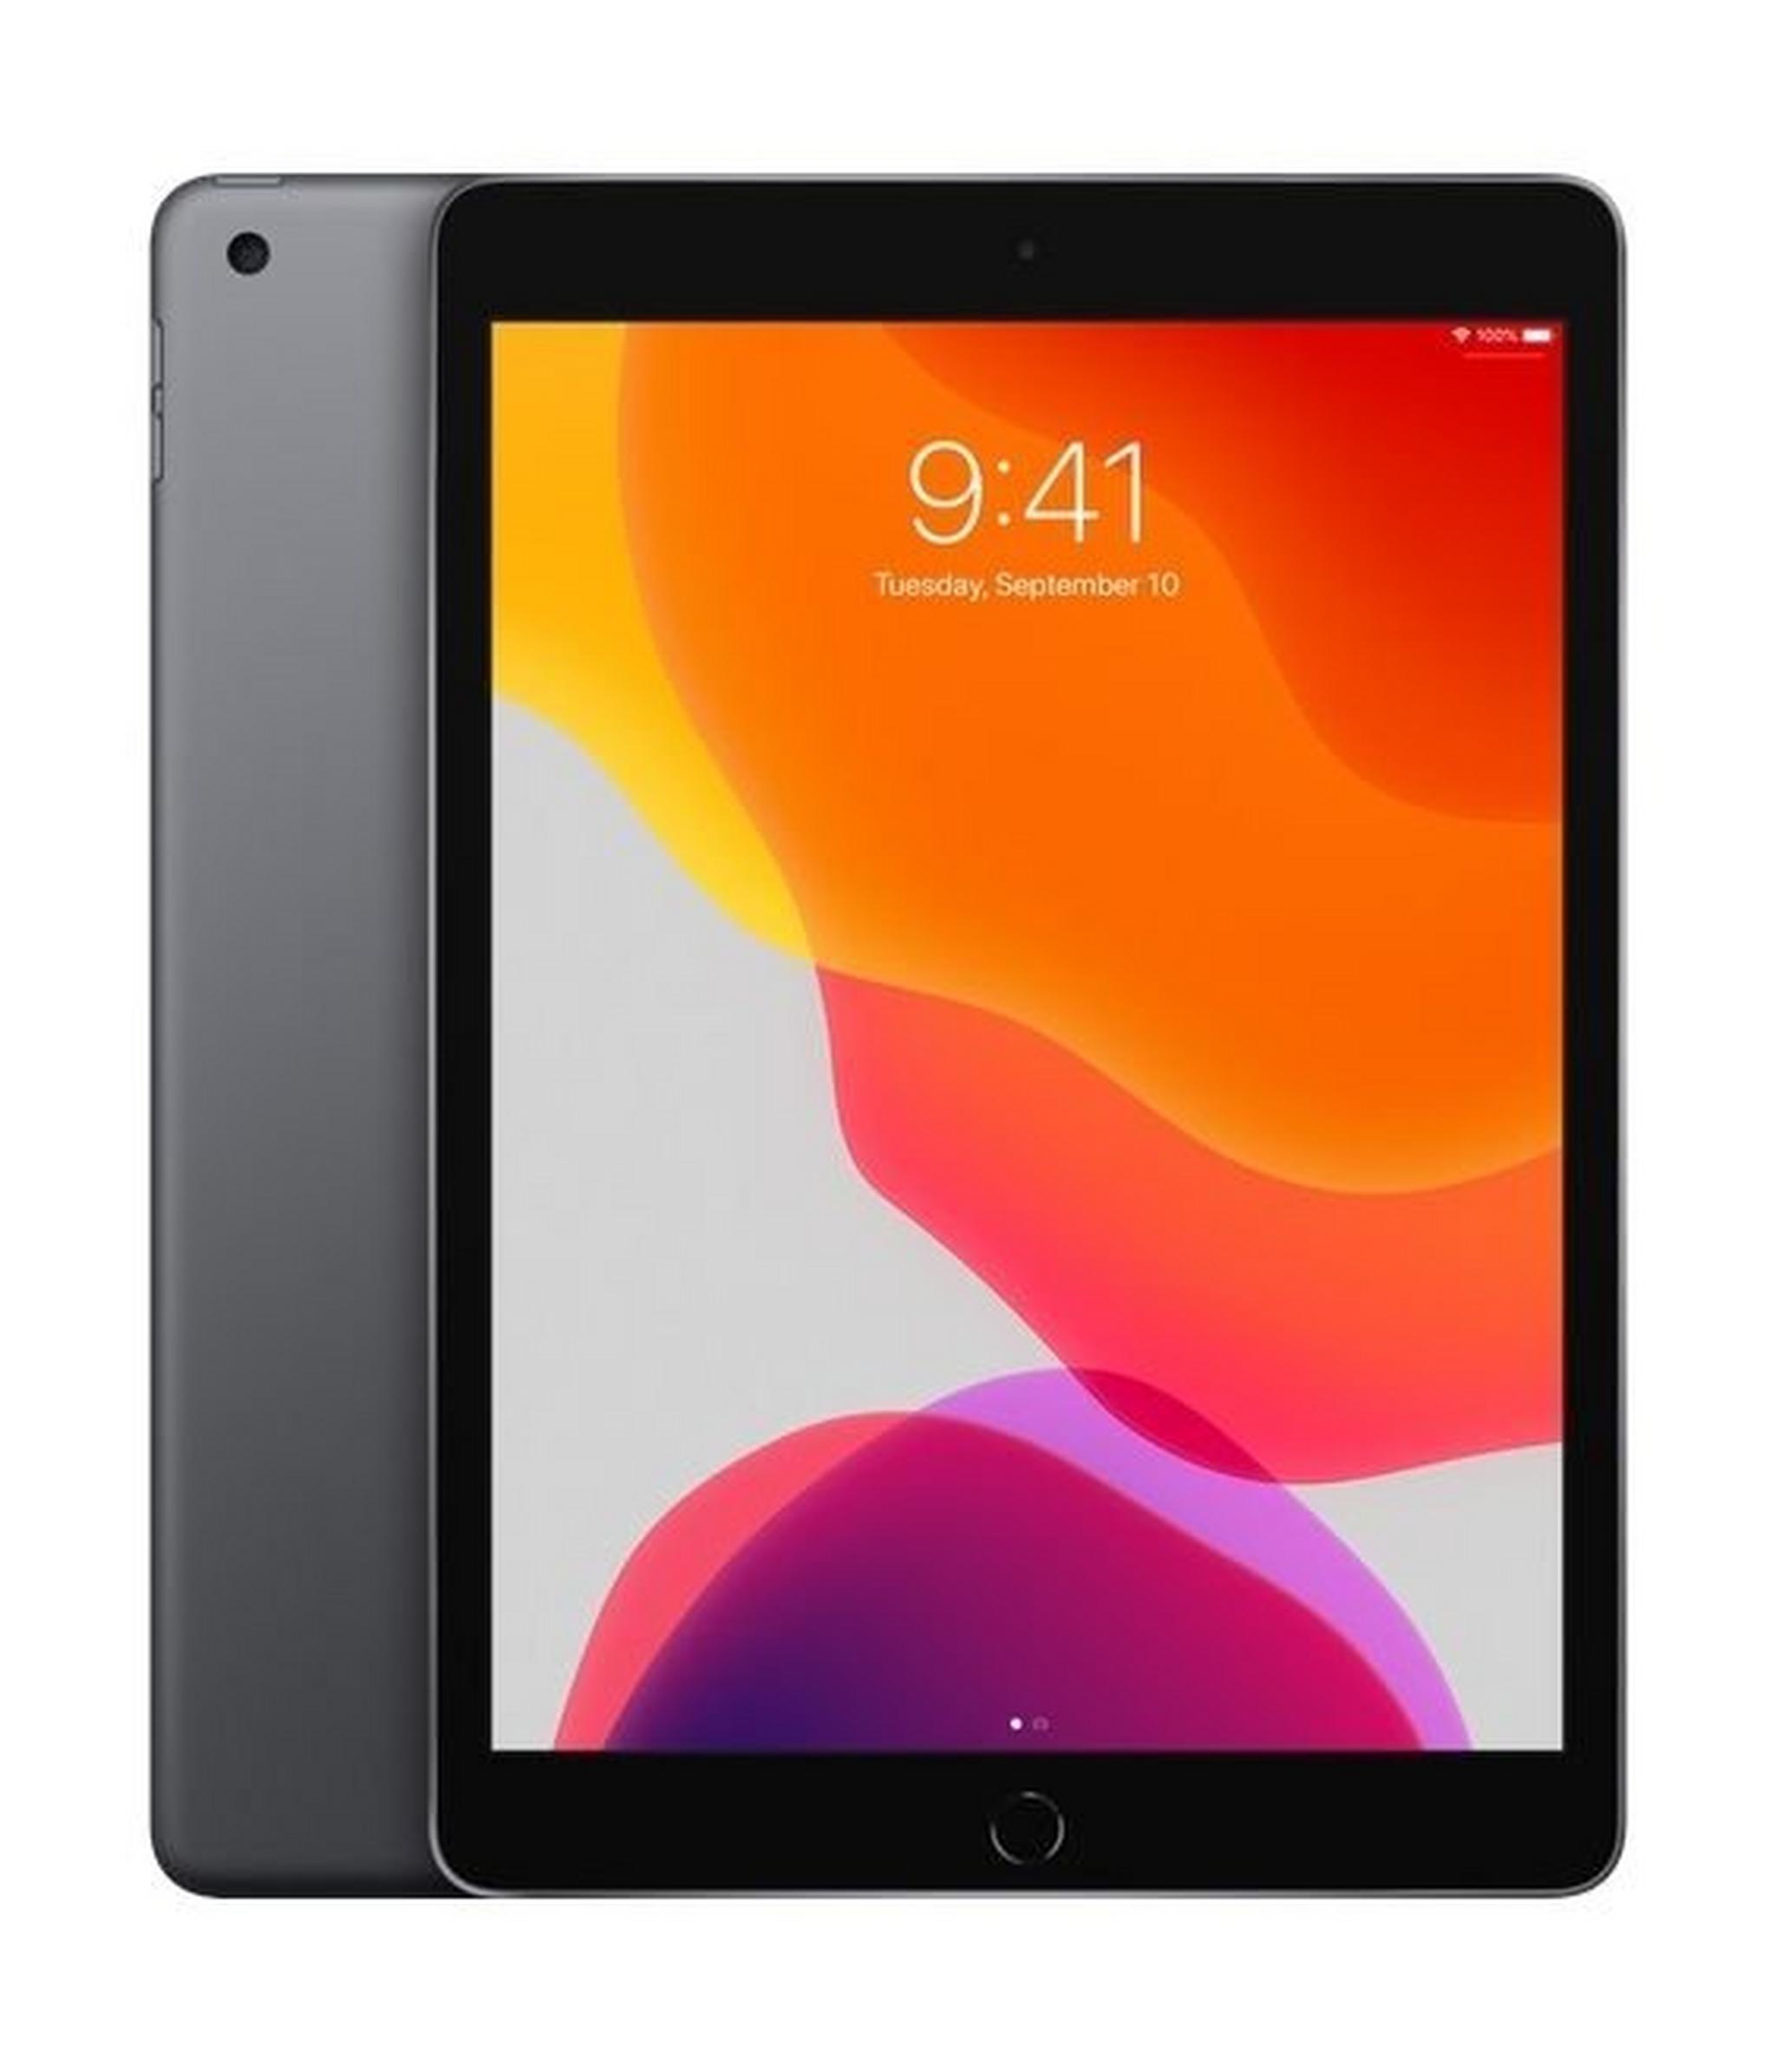 Apple iPad 7 10.2-inch 32GB Wi-Fi Only Tablet - Space Grey